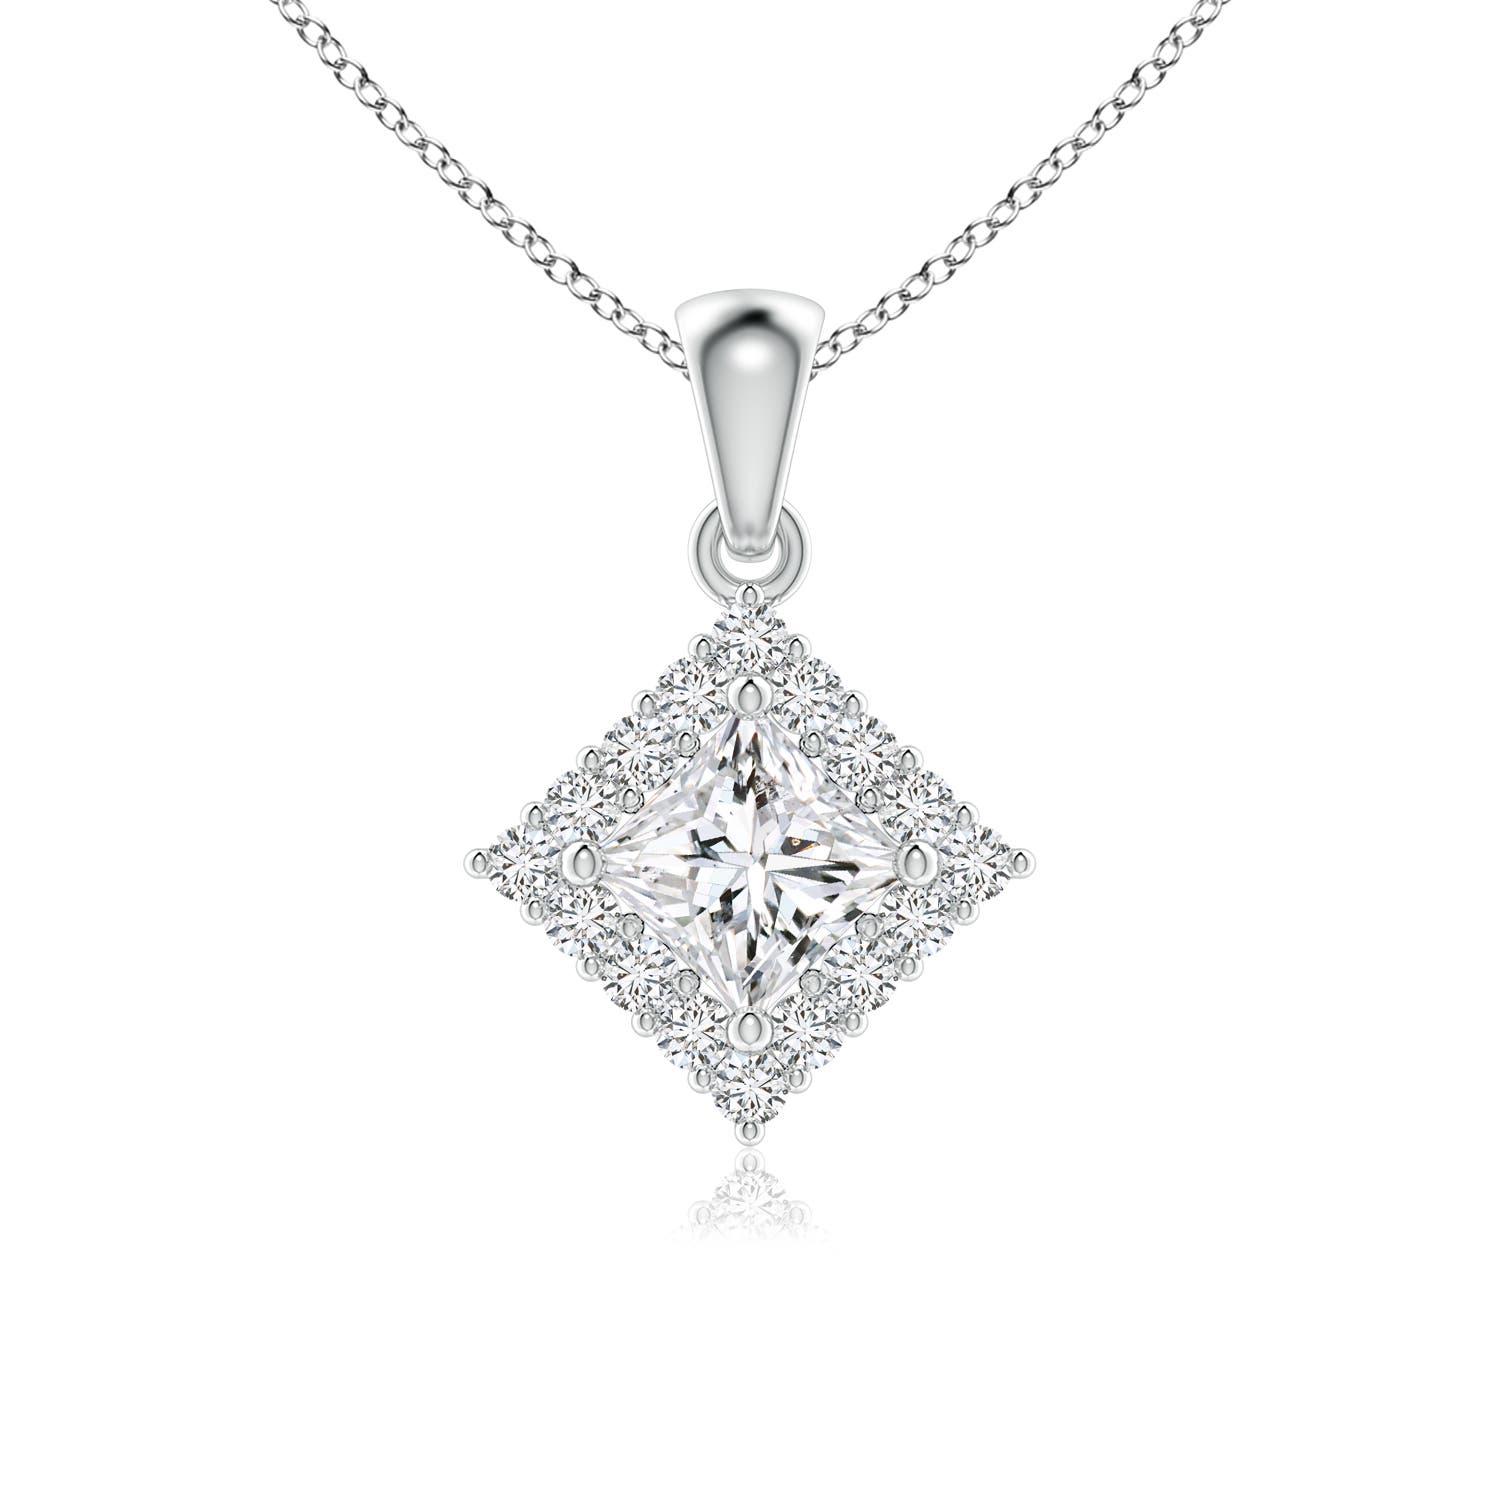 H, SI2 / 0.49 CT / 14 KT White Gold